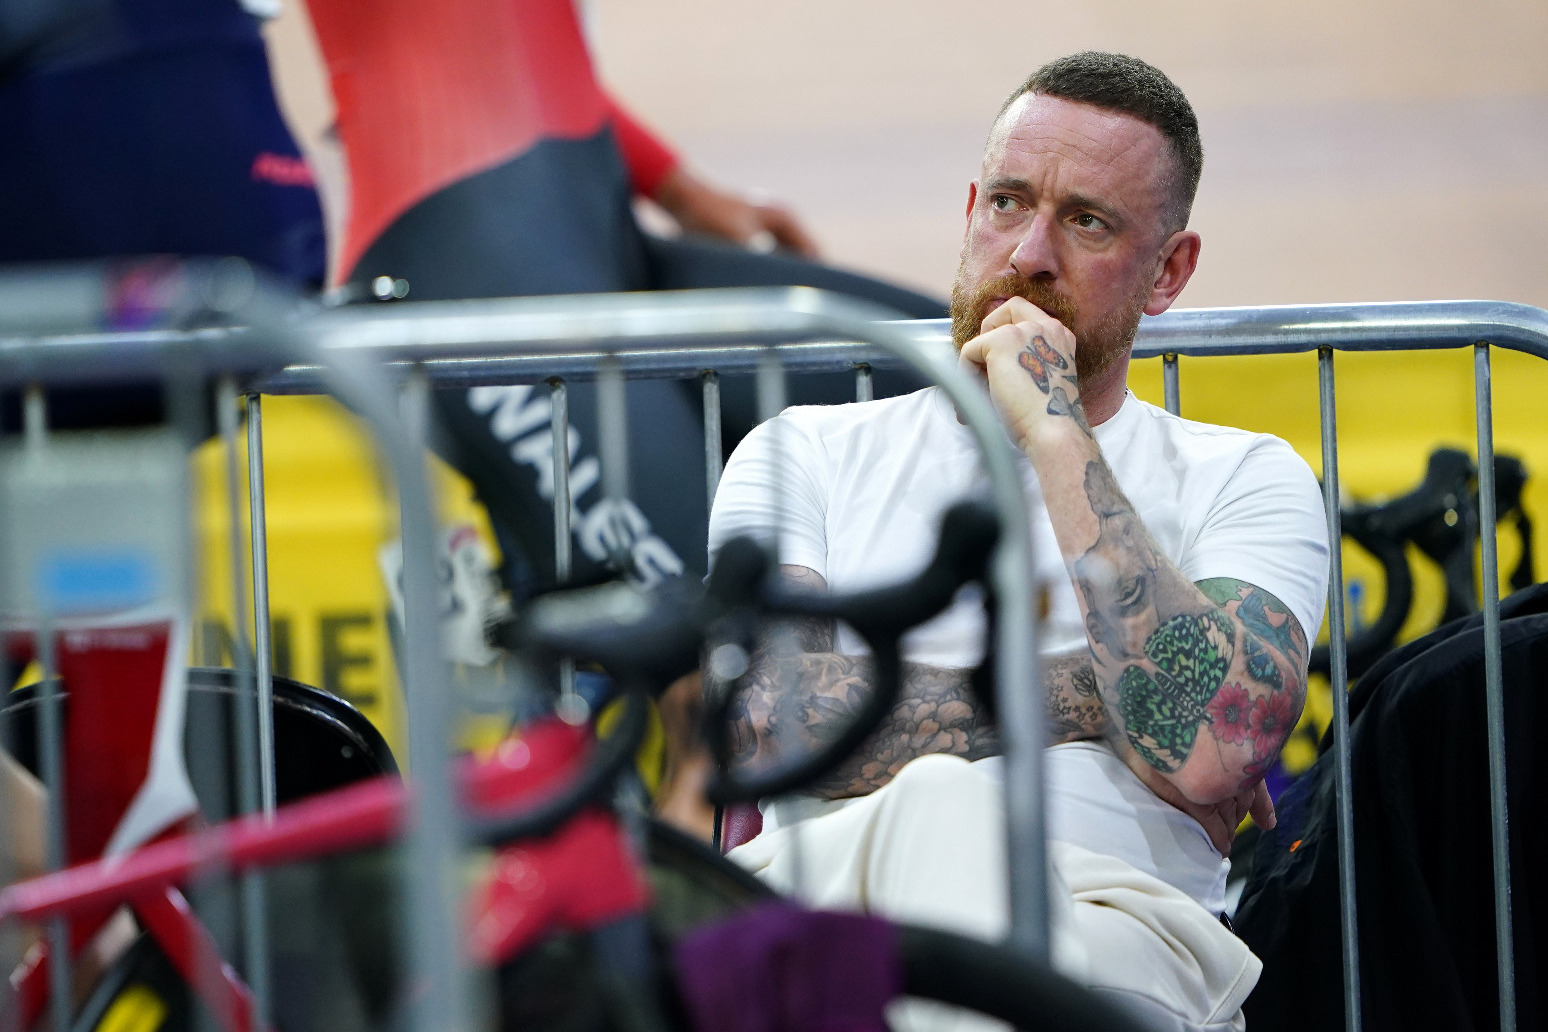 Sir Bradley Wiggins reveals he was sexually groomed by a coach at the age of 13 